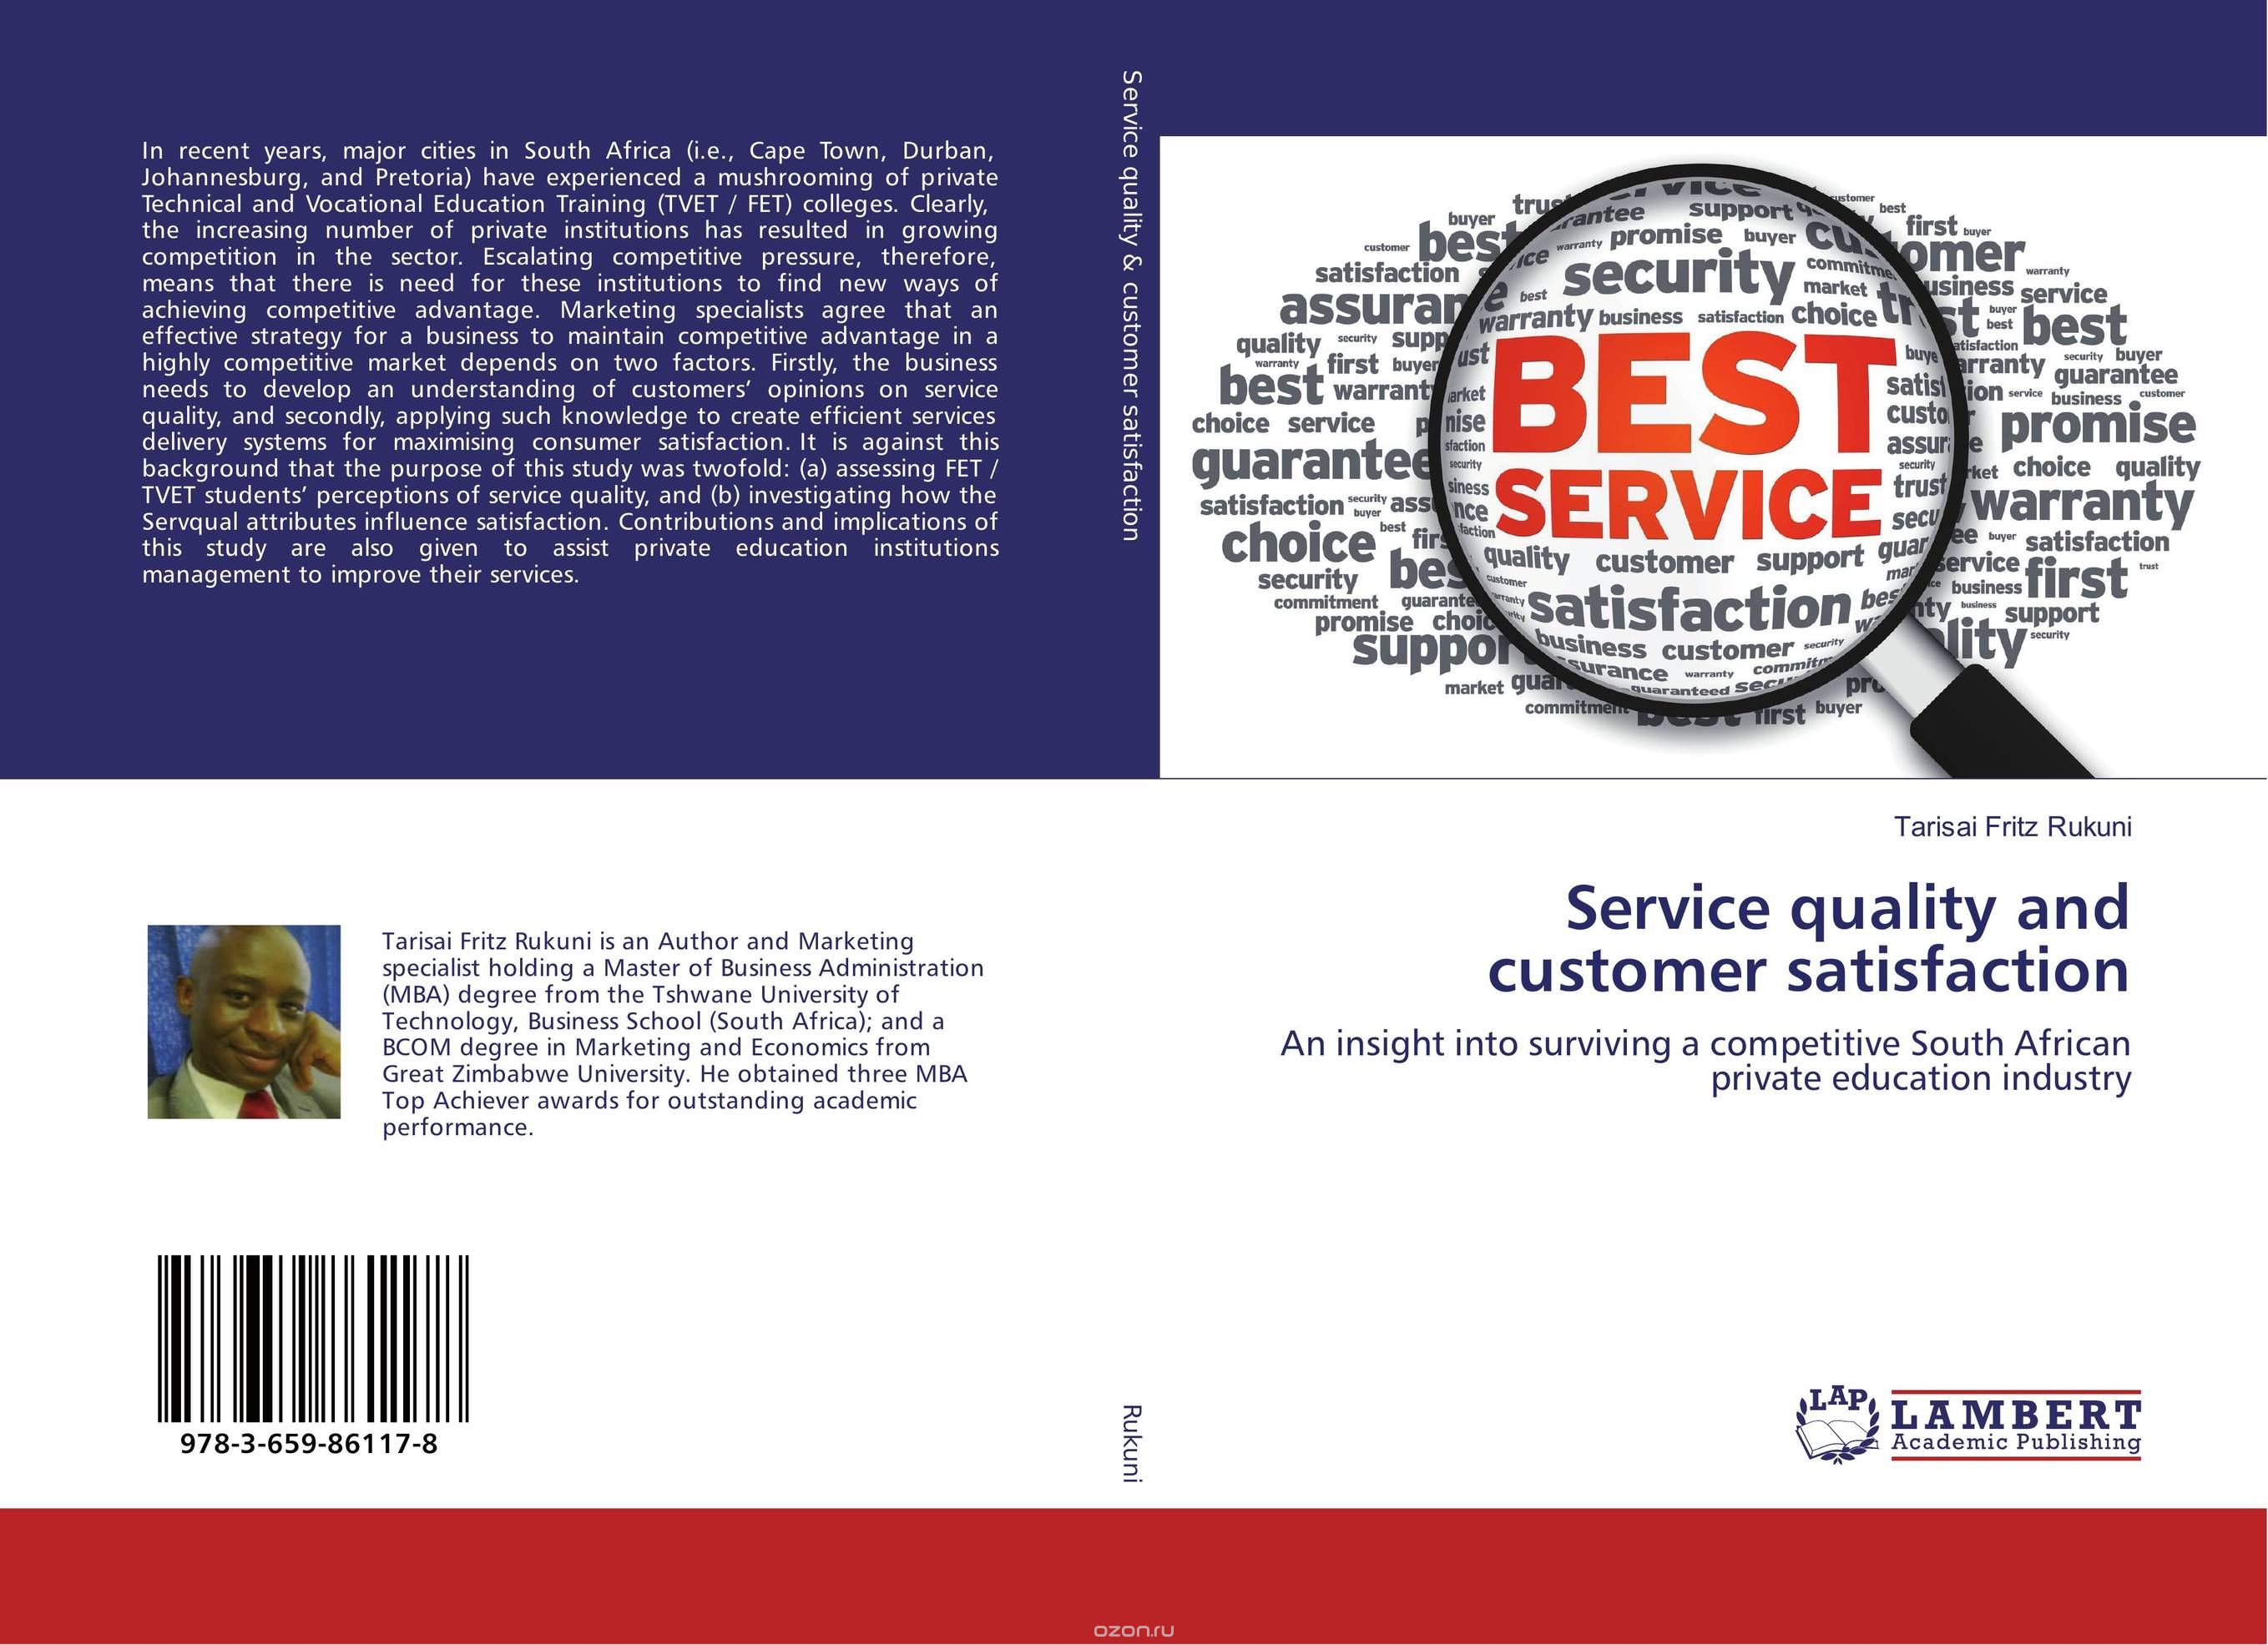 Service quality and customer satisfaction